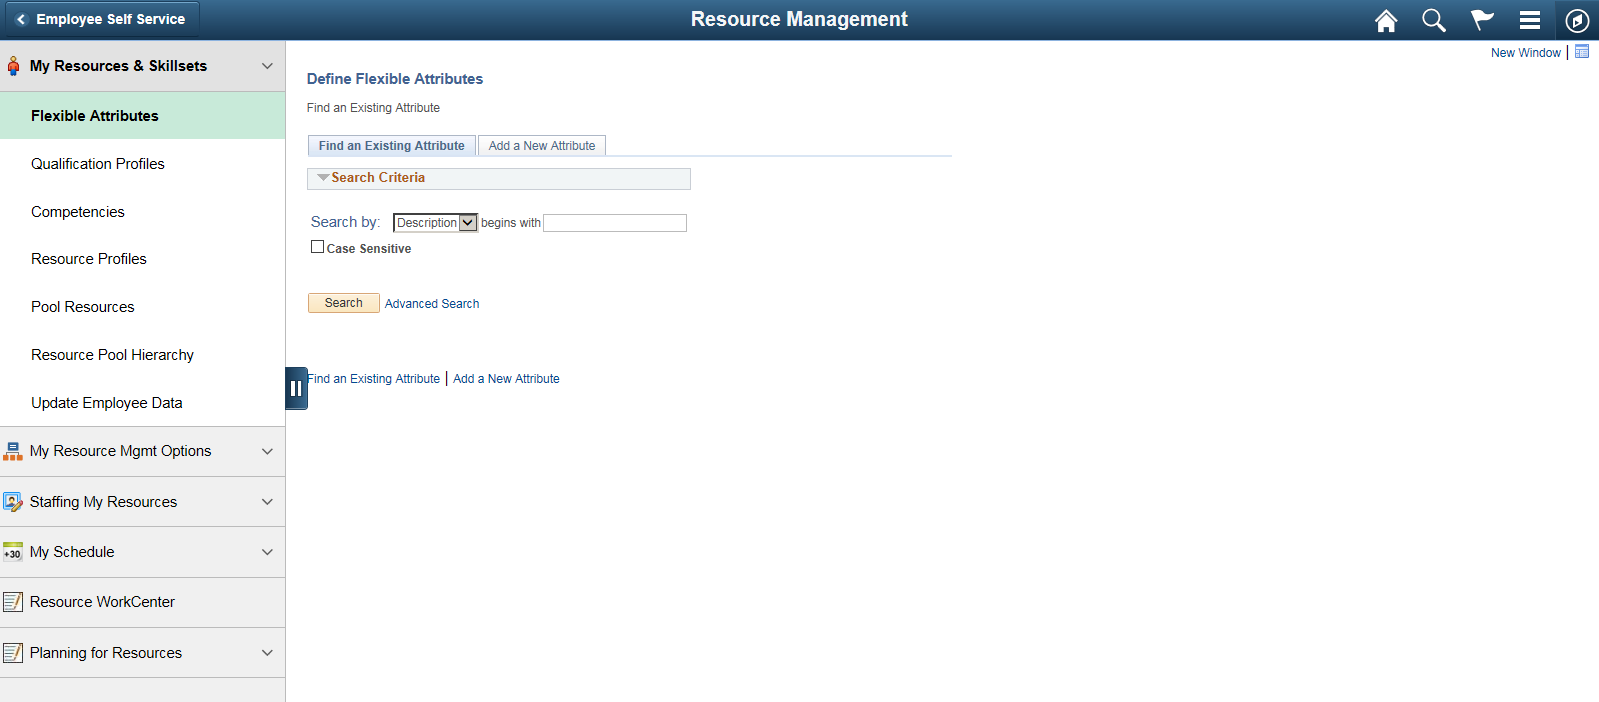 Resource Management Navigation Collections